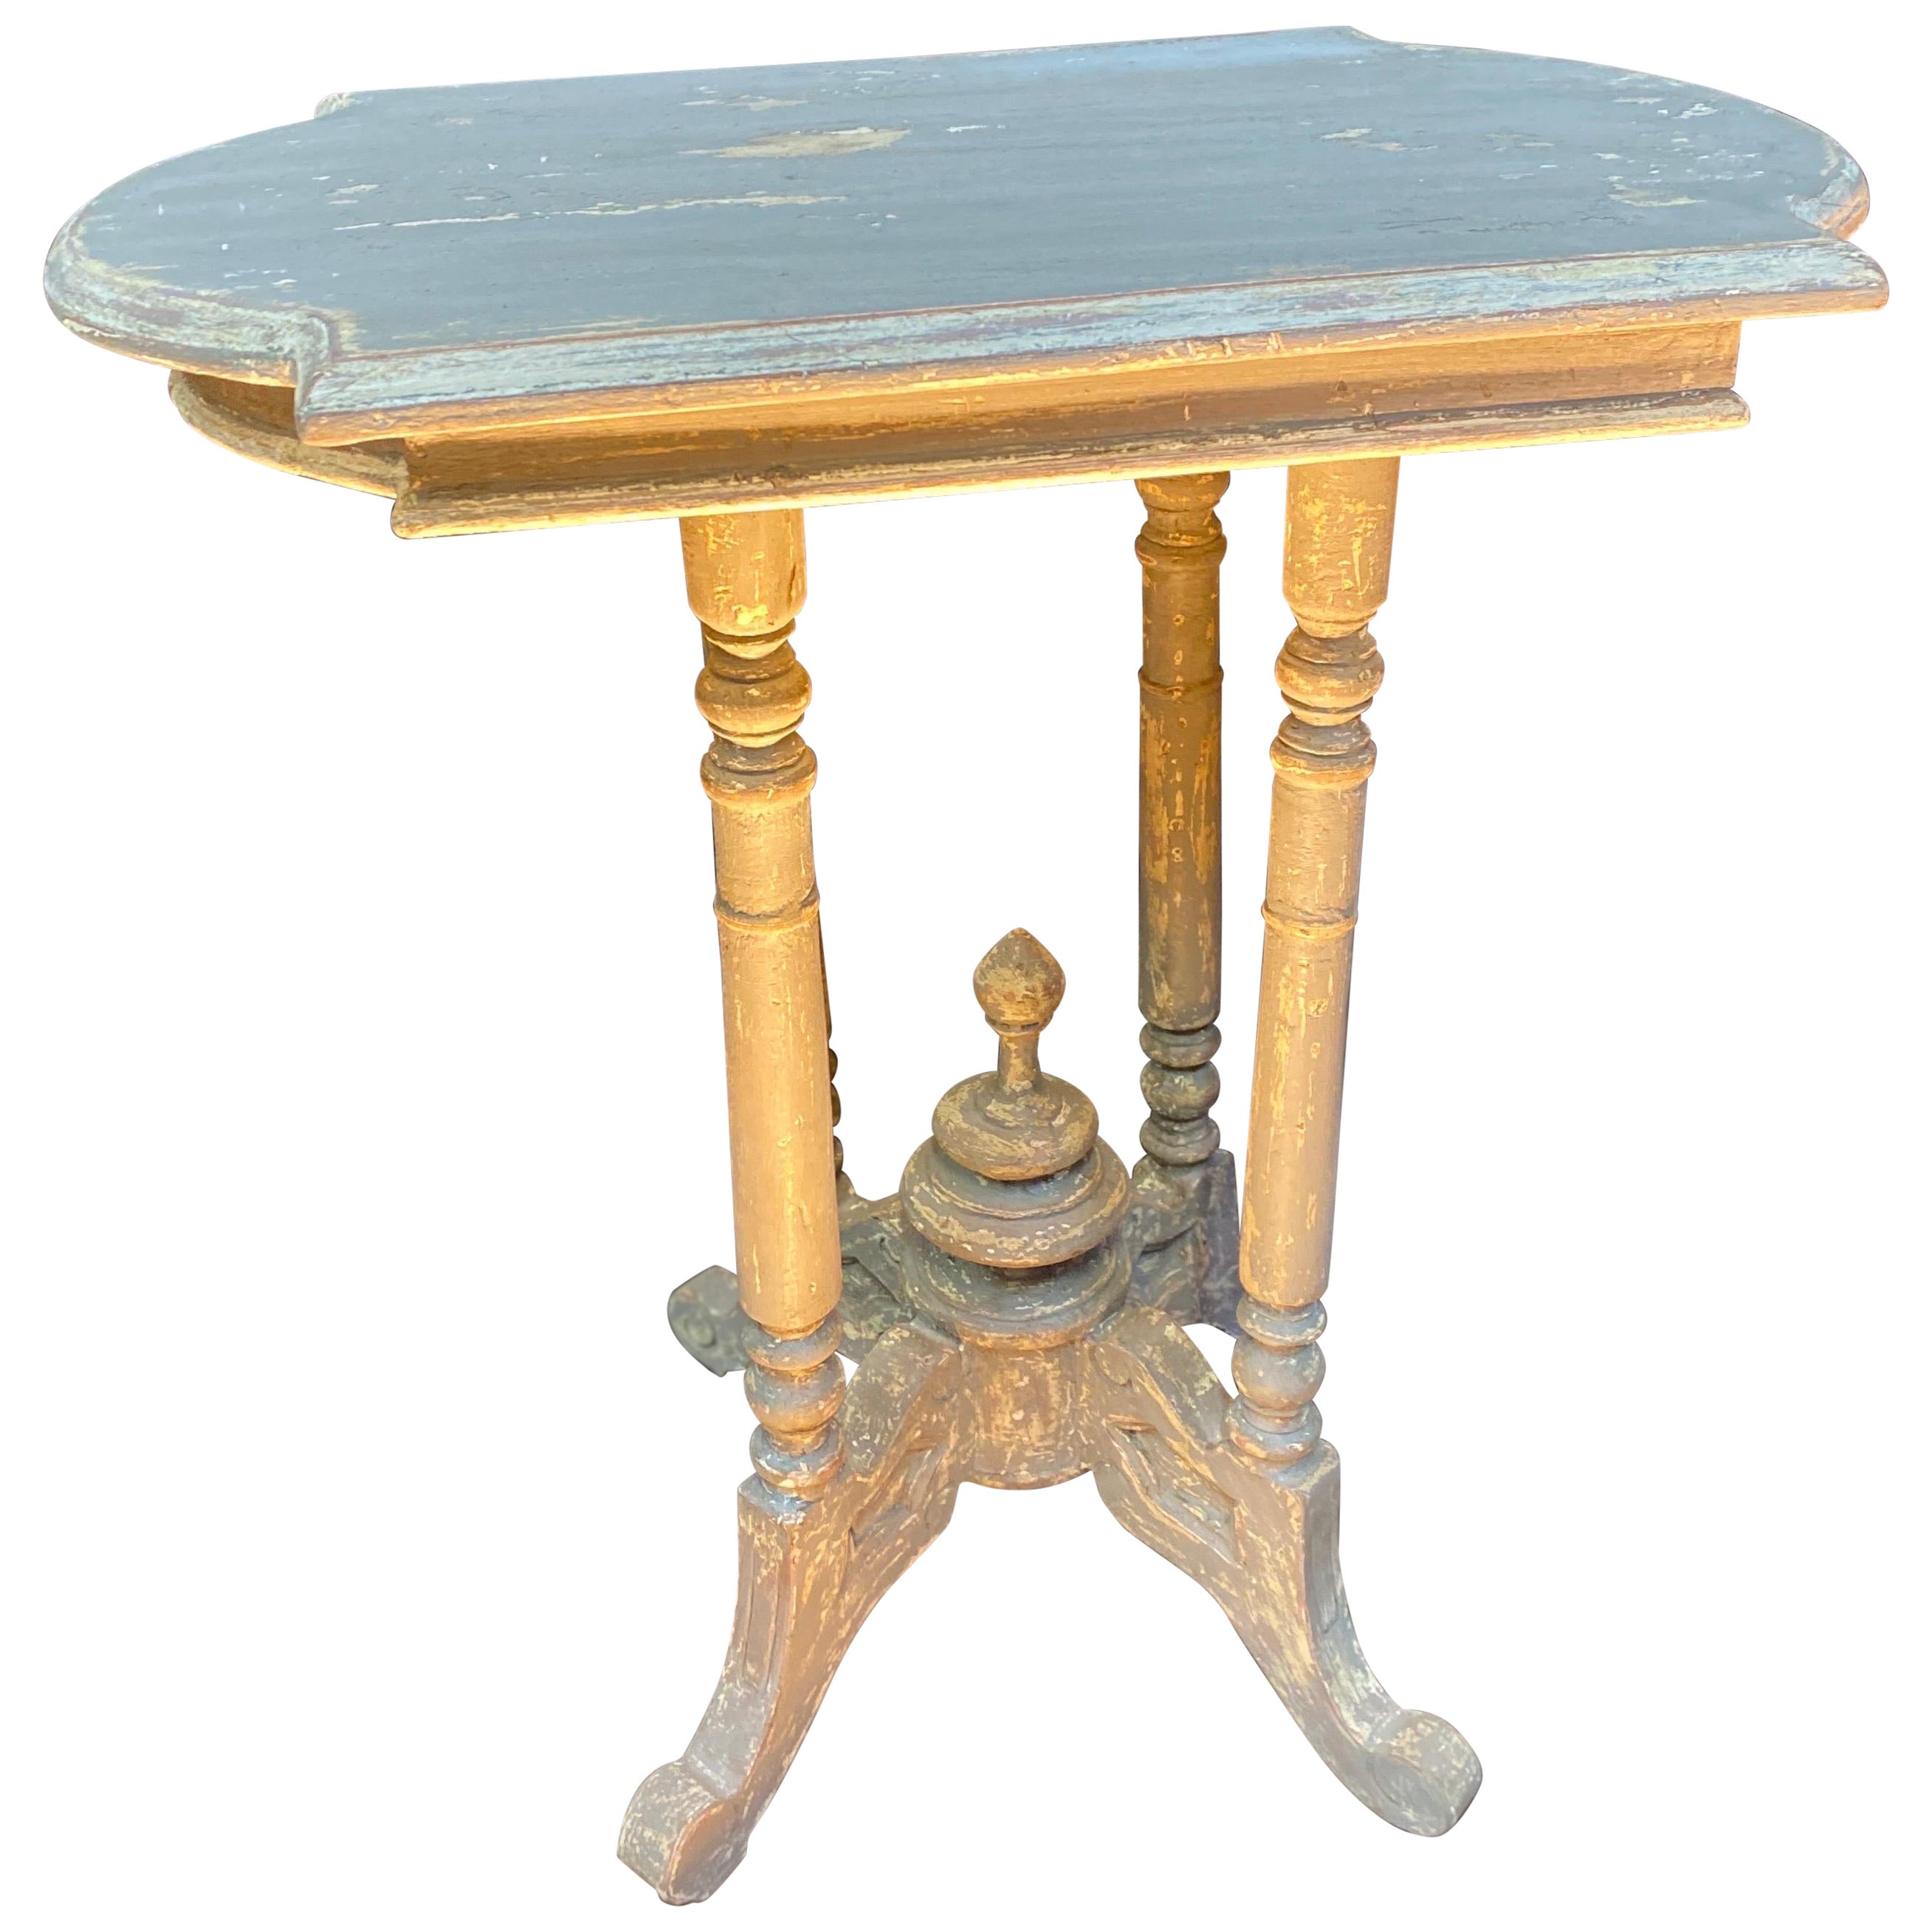 Napoléon iii pedestal table with patina dating from the 19th century 